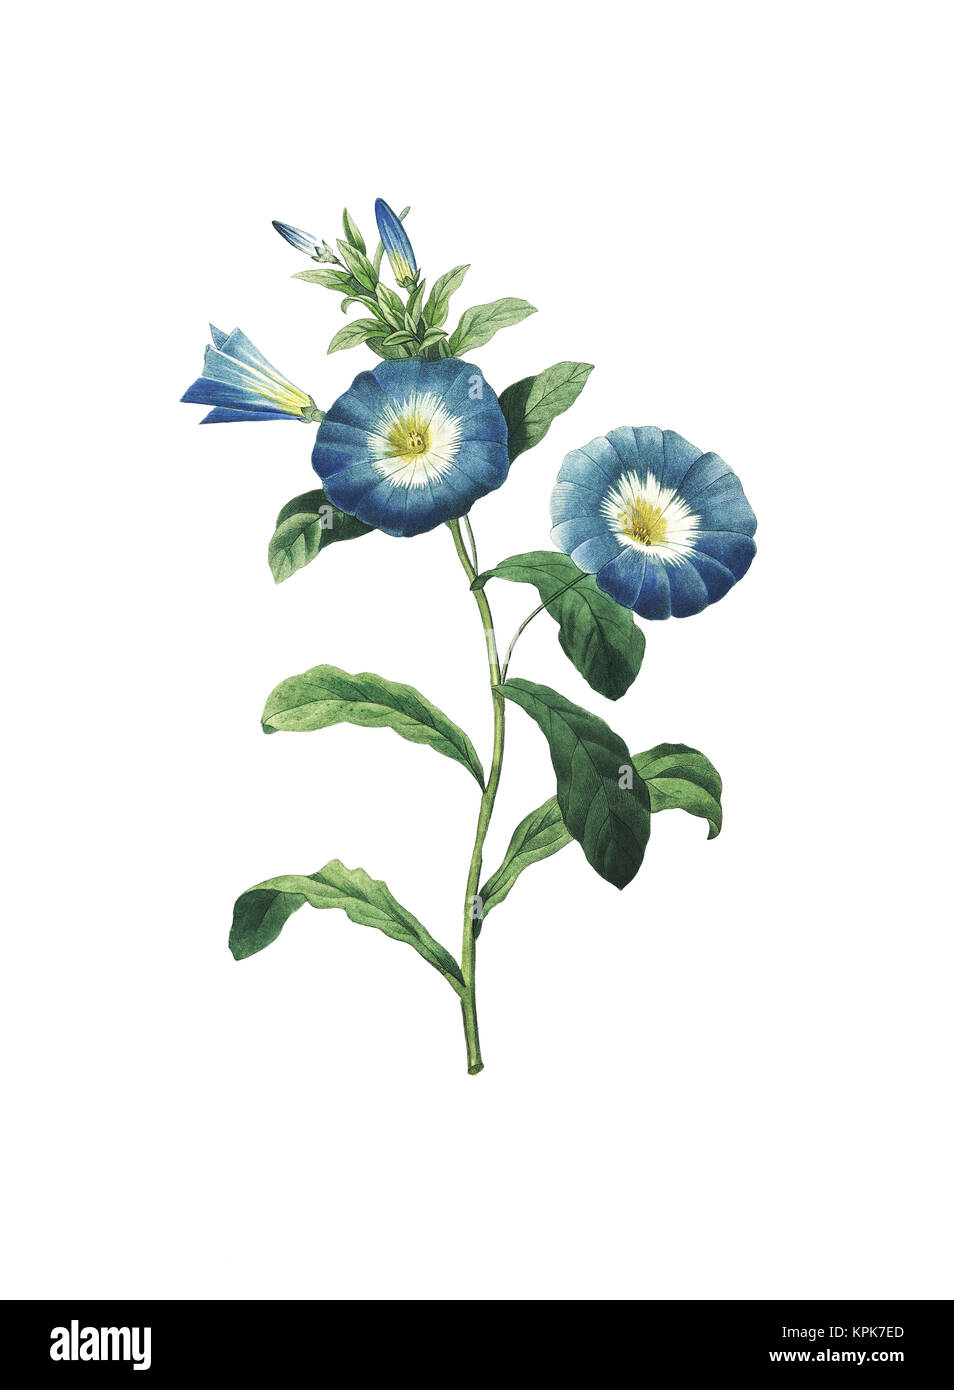 19th-century illustration of a convolvulus tricolor (Dwarf Morning Glory). Engraving by Pierre-Joseph Redoute. Published in Choix Des Plus Belles Fleu Stock Photo